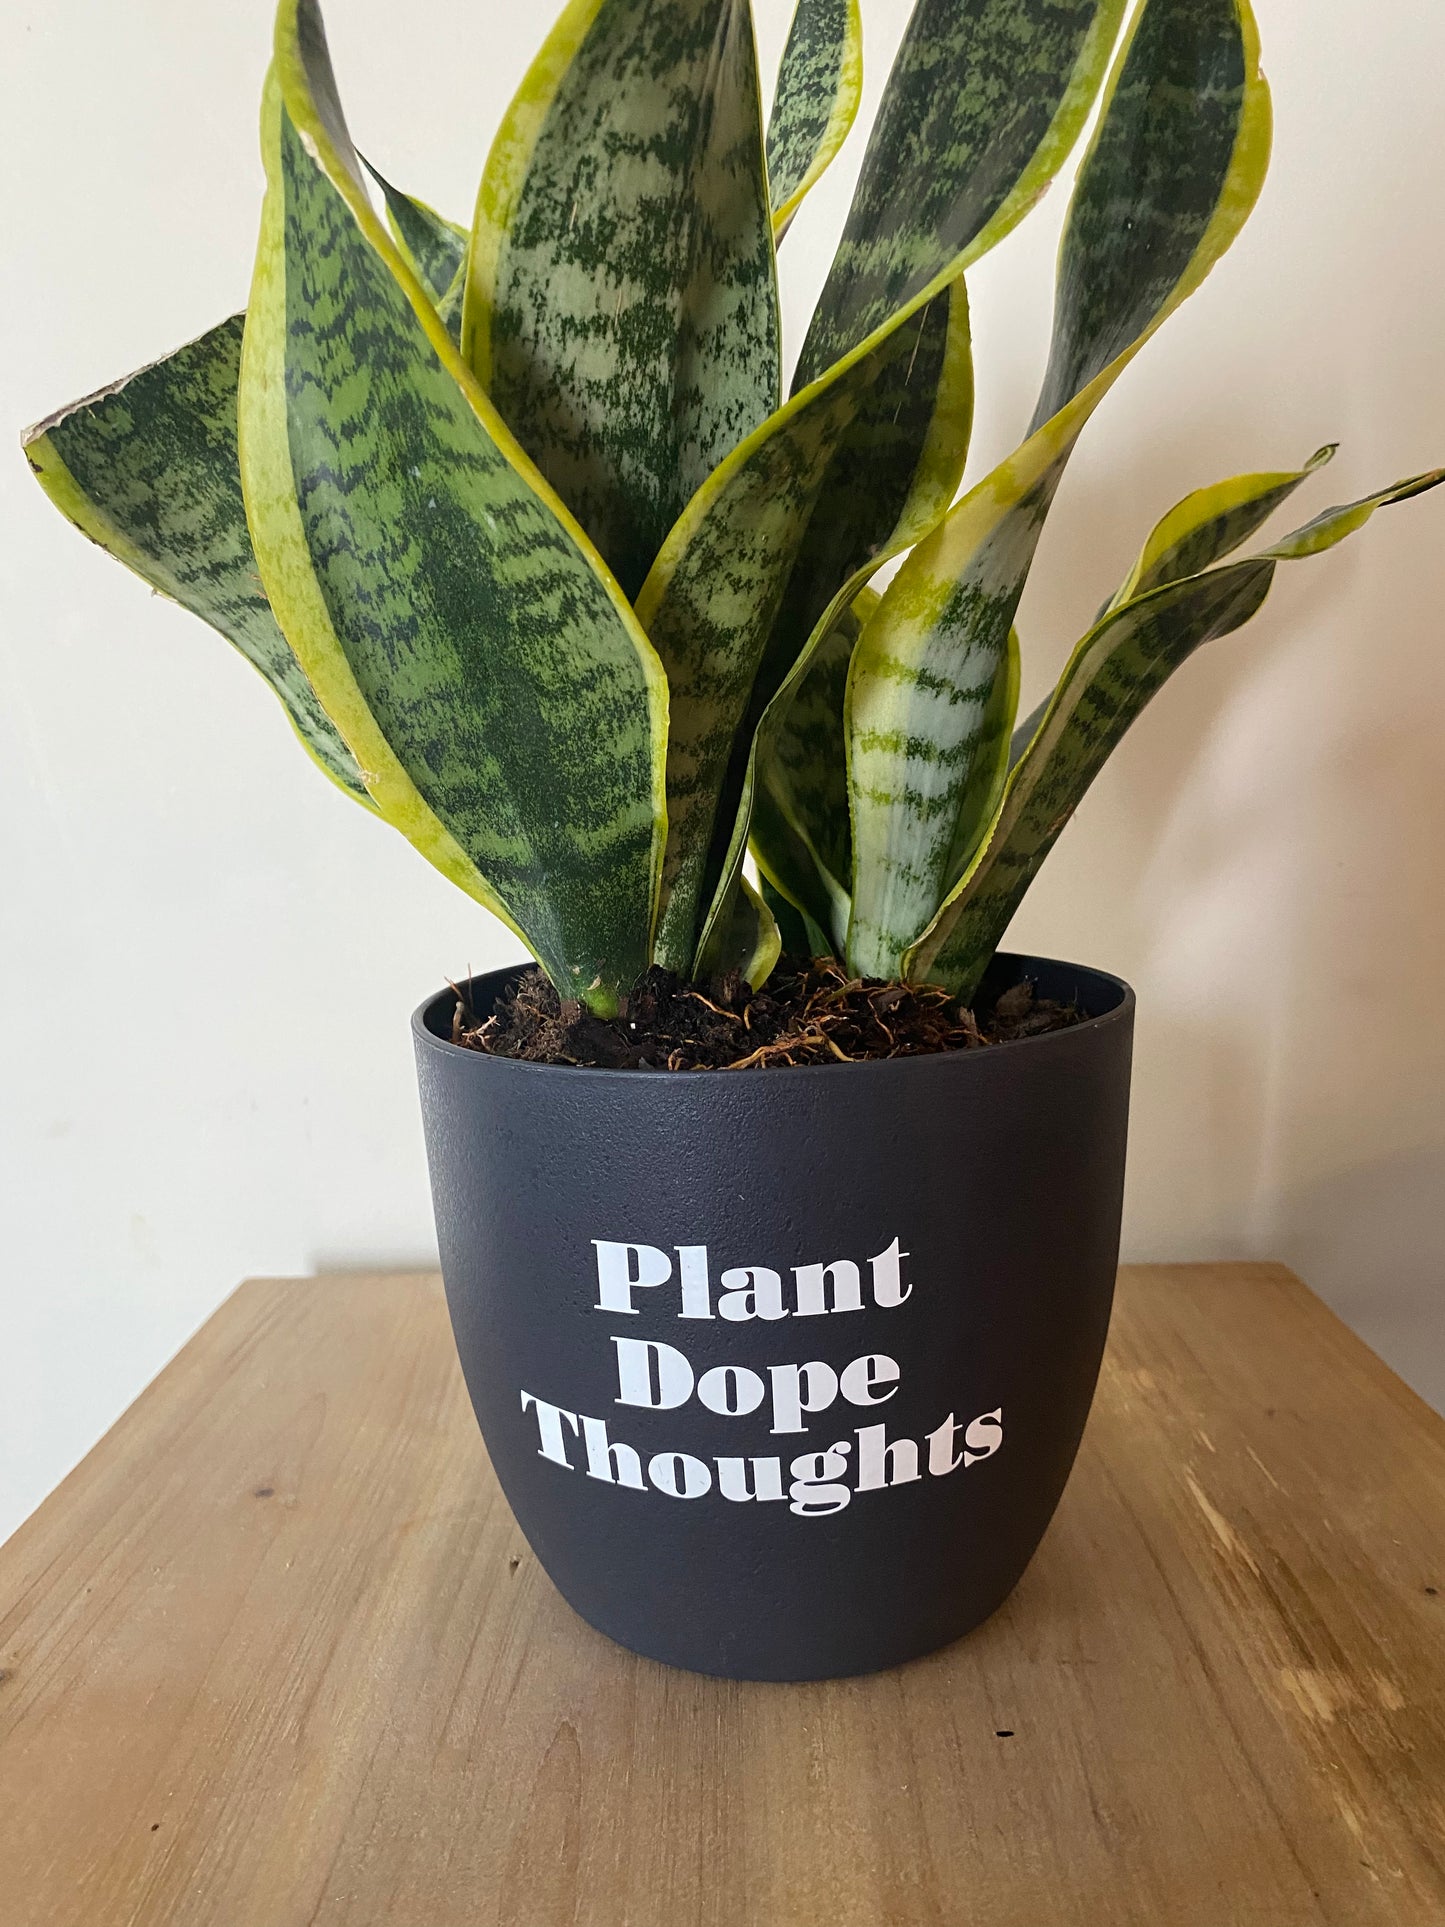 Plant Dope Thoughts.